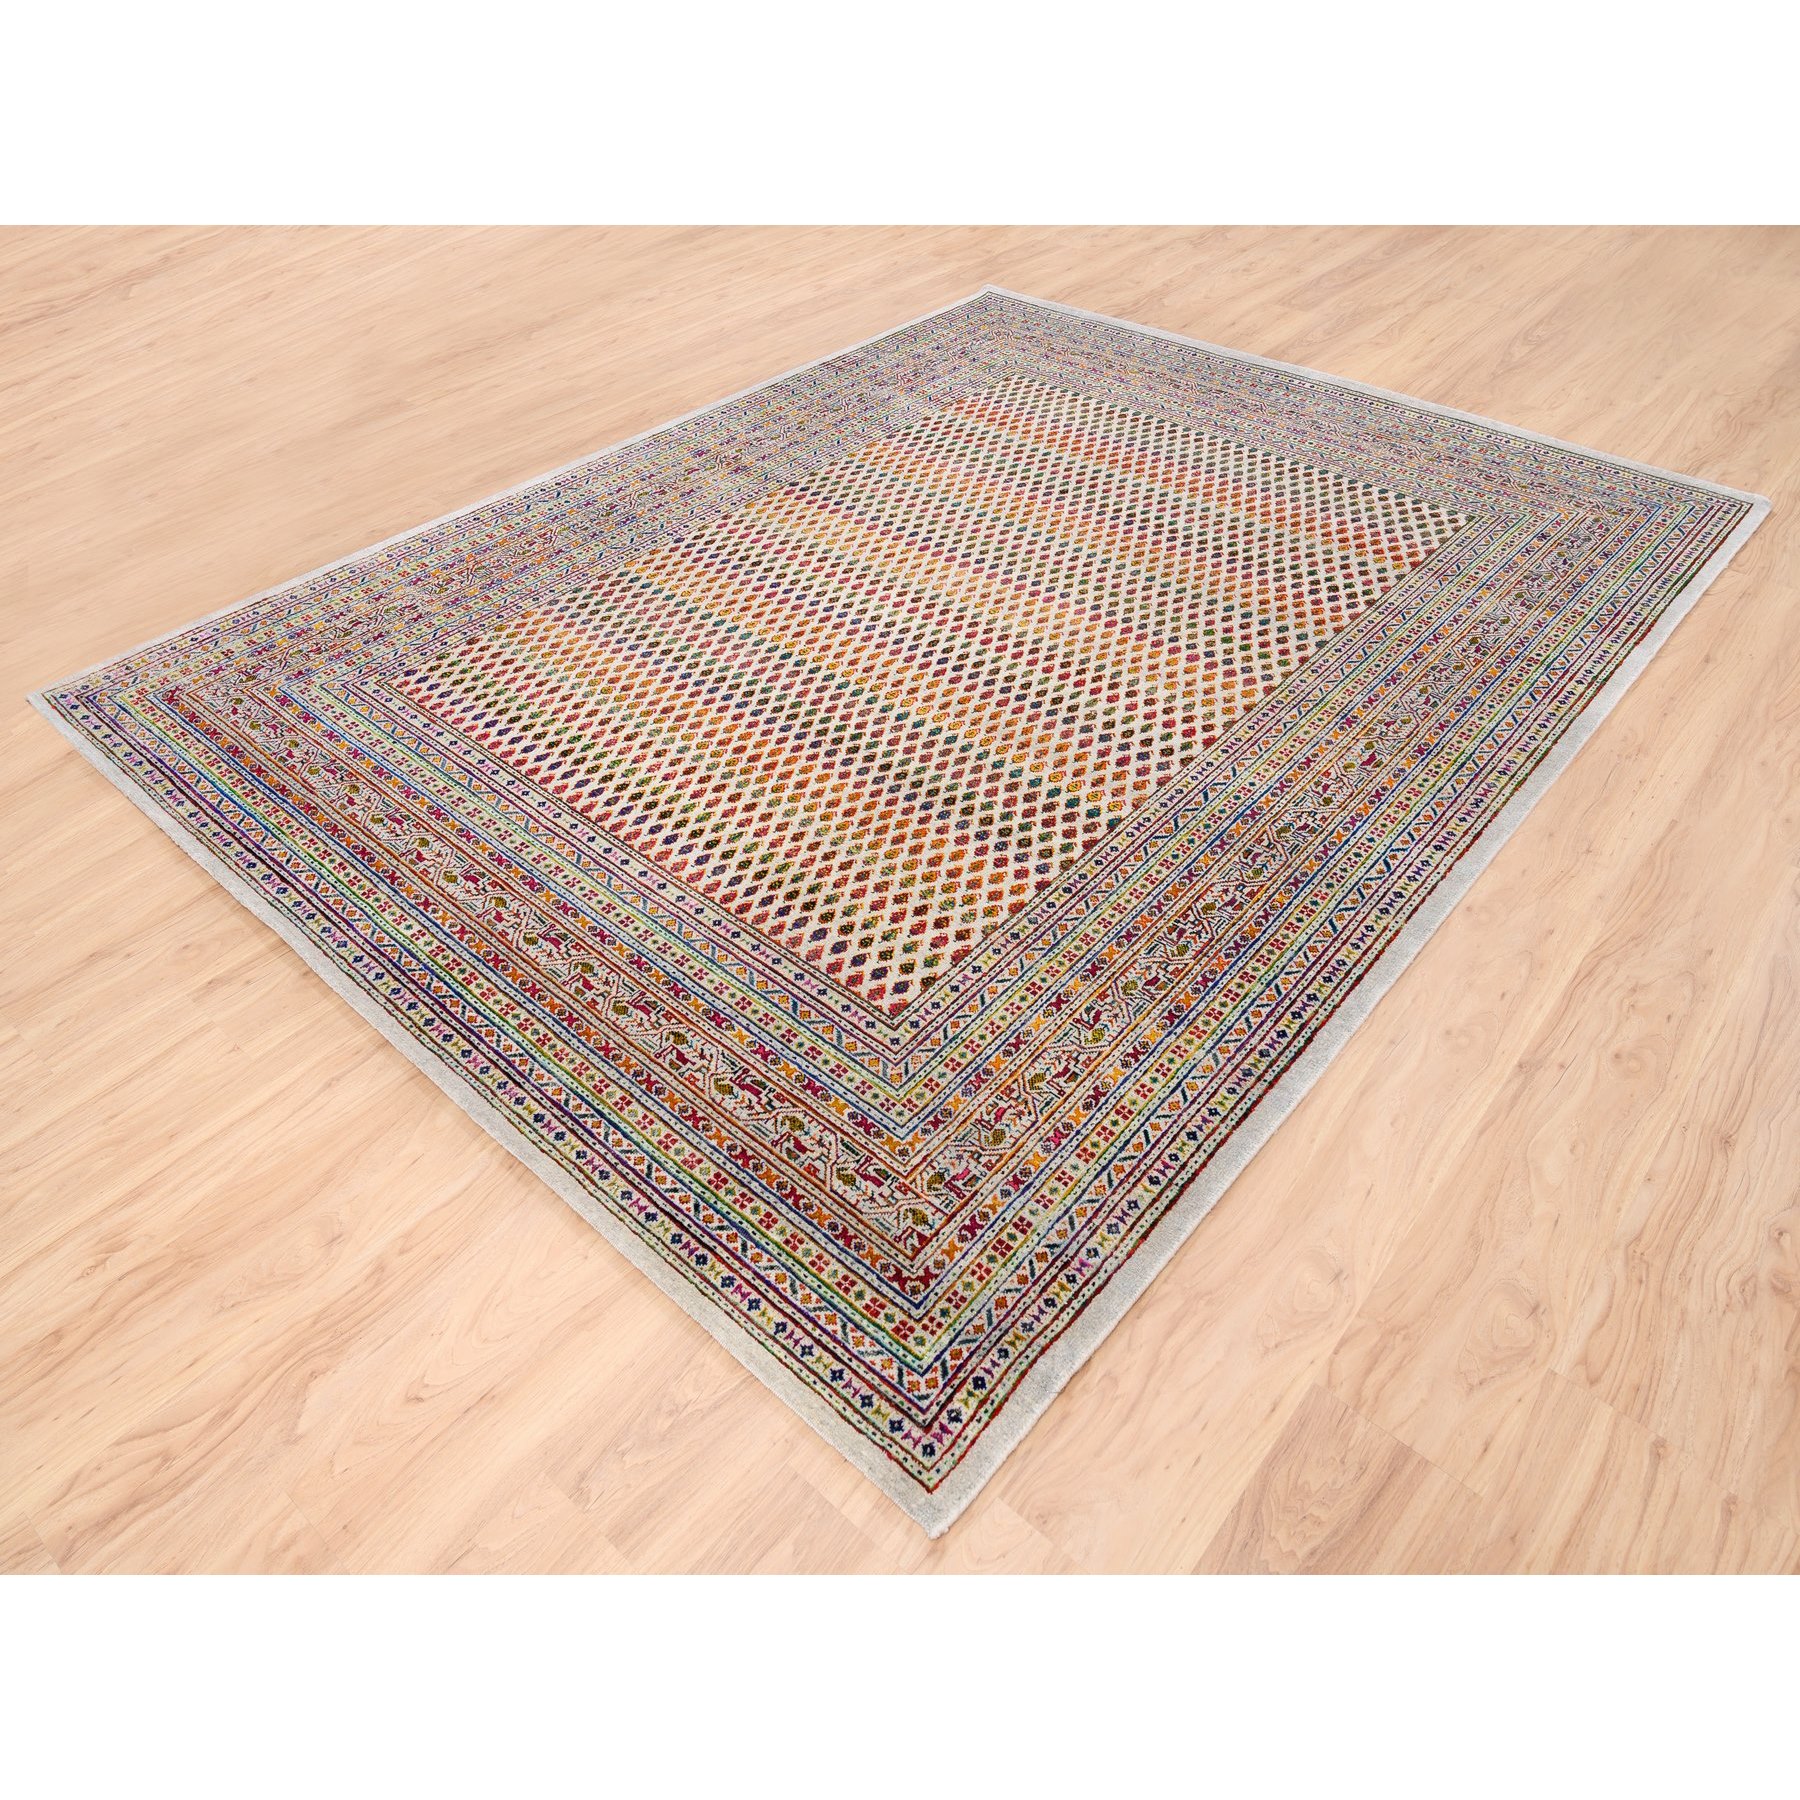 7'9"x10' Colorful Wool And Sari Silk Sarouk Mir Inspired With Repetitive Boteh Design Hand Woven Oriental Rug 